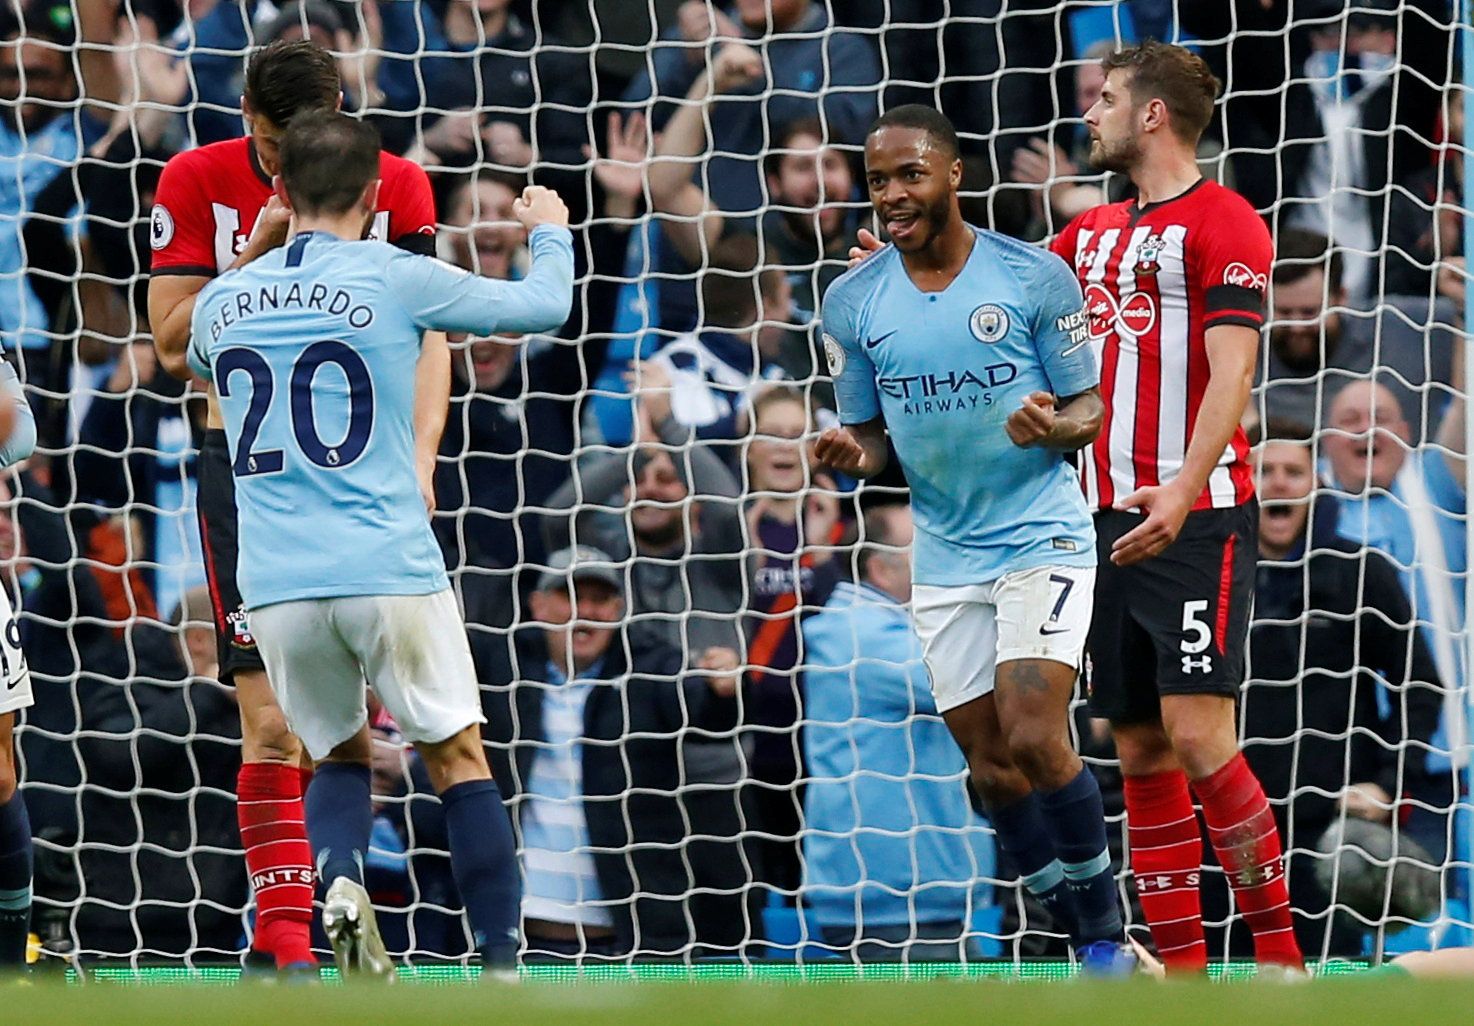 Soccer Football - Premier League - Manchester City v Southampton - Etihad Stadium, Manchester, Britain - November 4, 2018  Manchester City's Raheem Sterling celebrates scoring their fourth goal with team mates   REUTERS/Andrew Yates  EDITORIAL USE ONLY. No use with unauthorized audio, video, data, fixture lists, club/league logos or "live" services. Online in-match use limited to 75 images, no video emulation. No use in betting, games or single club/league/player publications.  Please contact yo